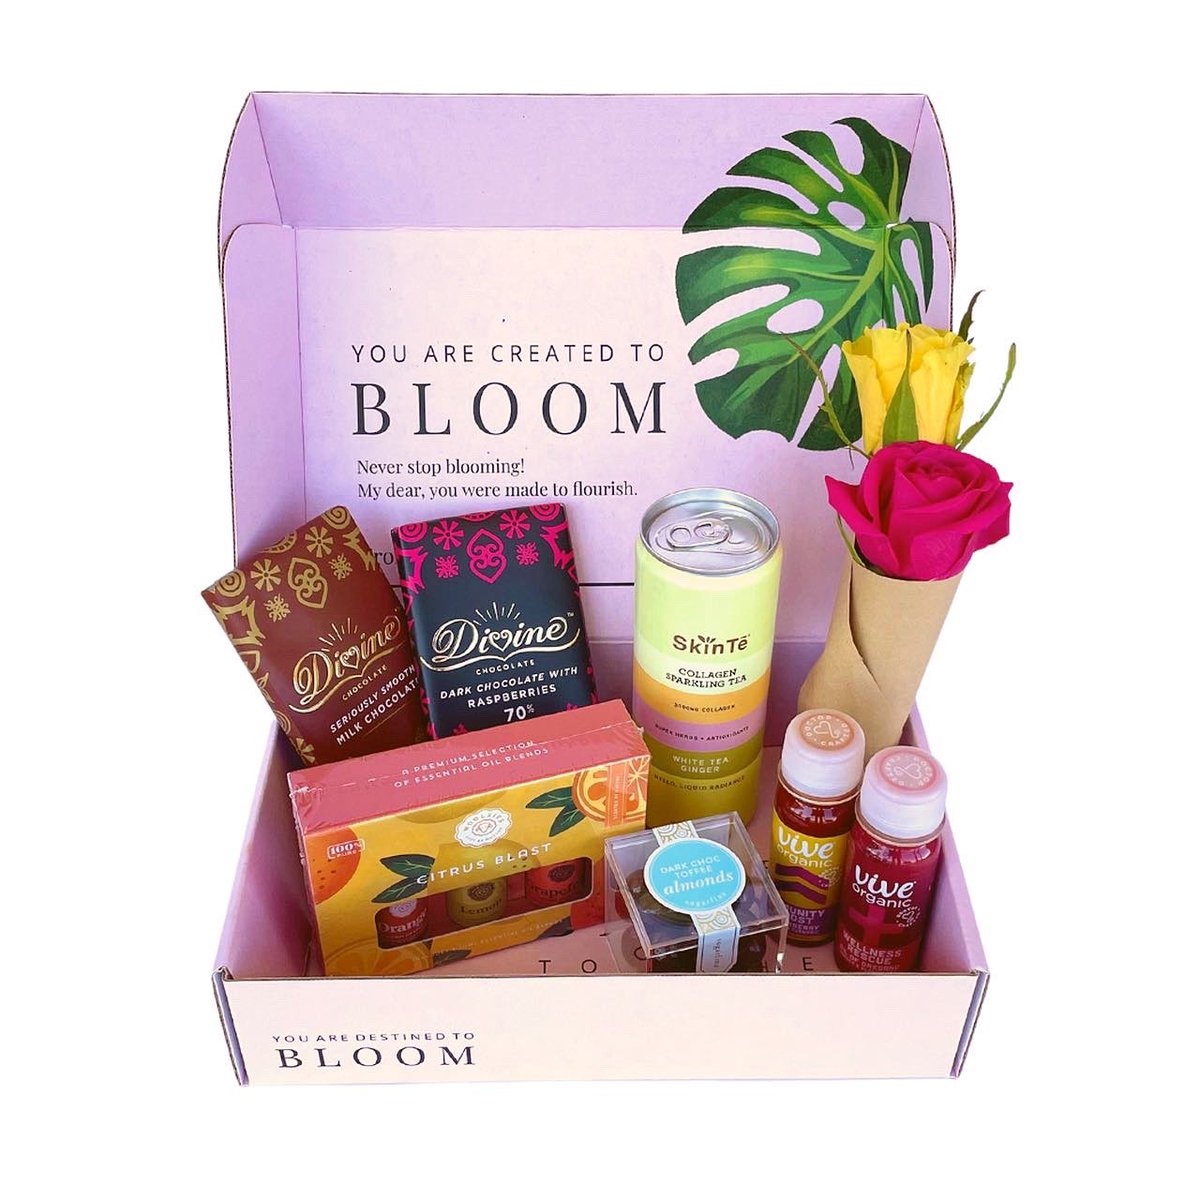 All your favorite brands, all in one box. Have you ordered yourself a Bloom Box yet? Try it at angiesfloraldesigns.com

🌸🌸🌸

#bloombox
#subscriptionbox 
#brands
#brandambassador 
#brandpartnerships